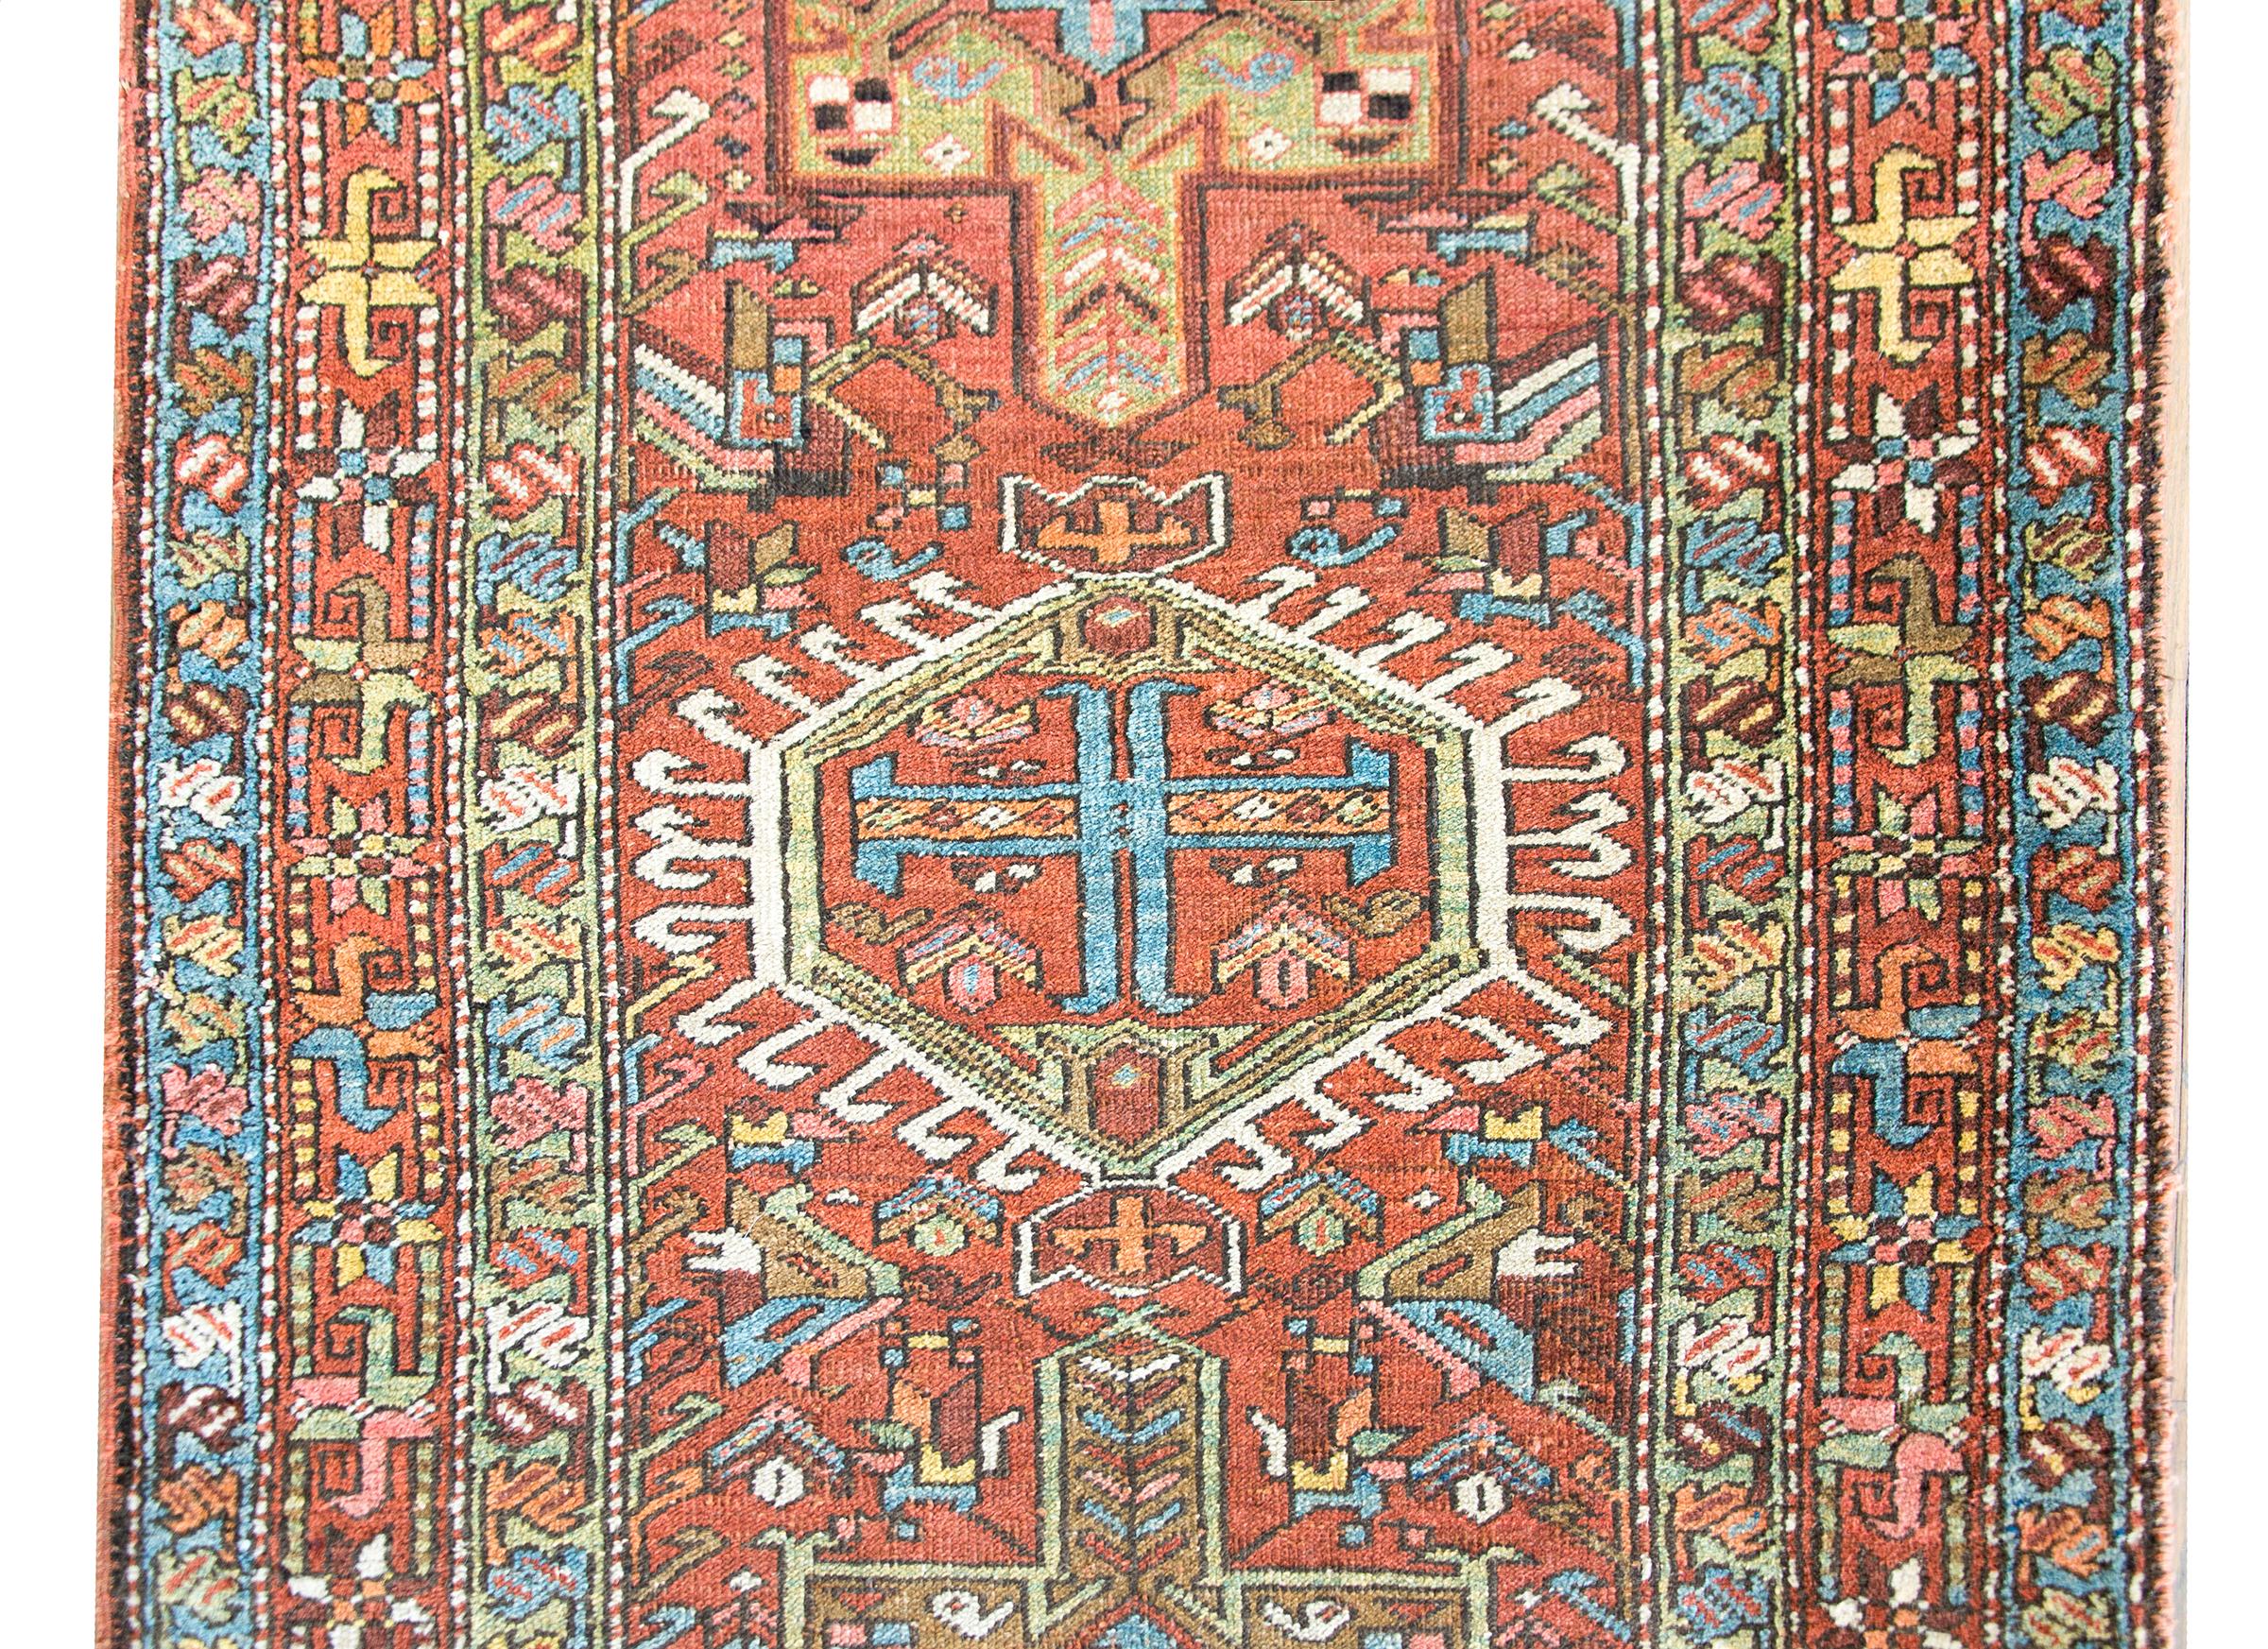 A stunning early 20th century Persian hertz runner with myriad stylized floral medallions woven in pinks, indigos, whites, oranges, and crimsons, surrounded by a fantastic complex floral partnered stripe borders.